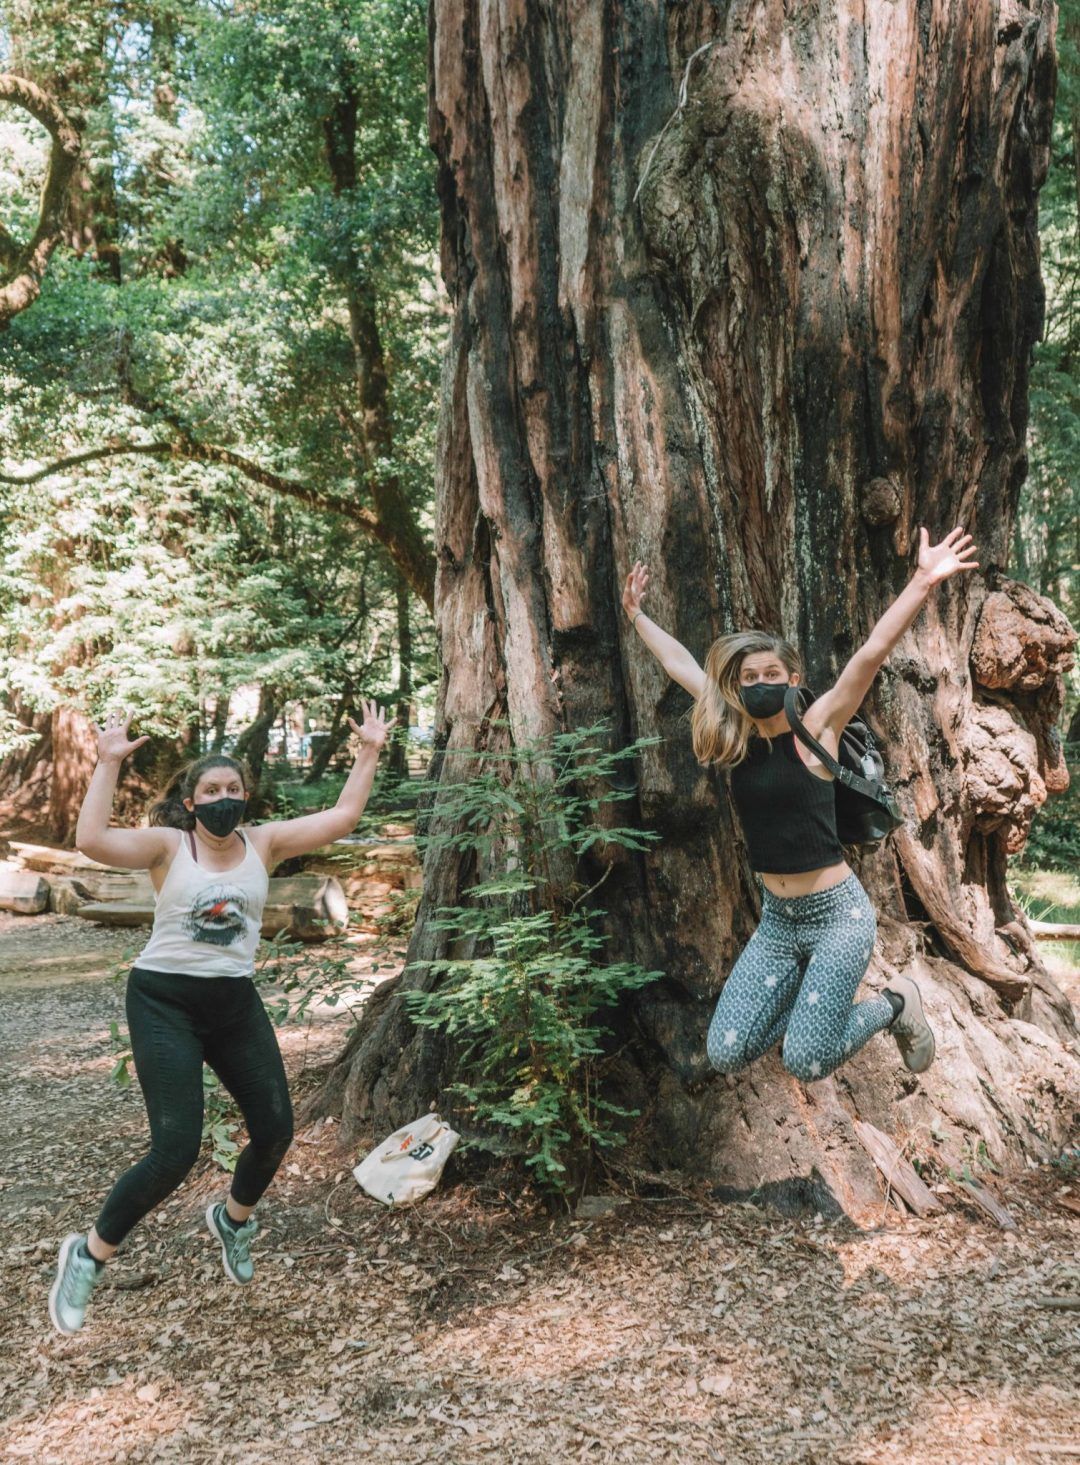 Two women wearing face masks and leggings caught mid-jump with their arms raised at the base of a huge tree in Big Basin Redwoods State Park.